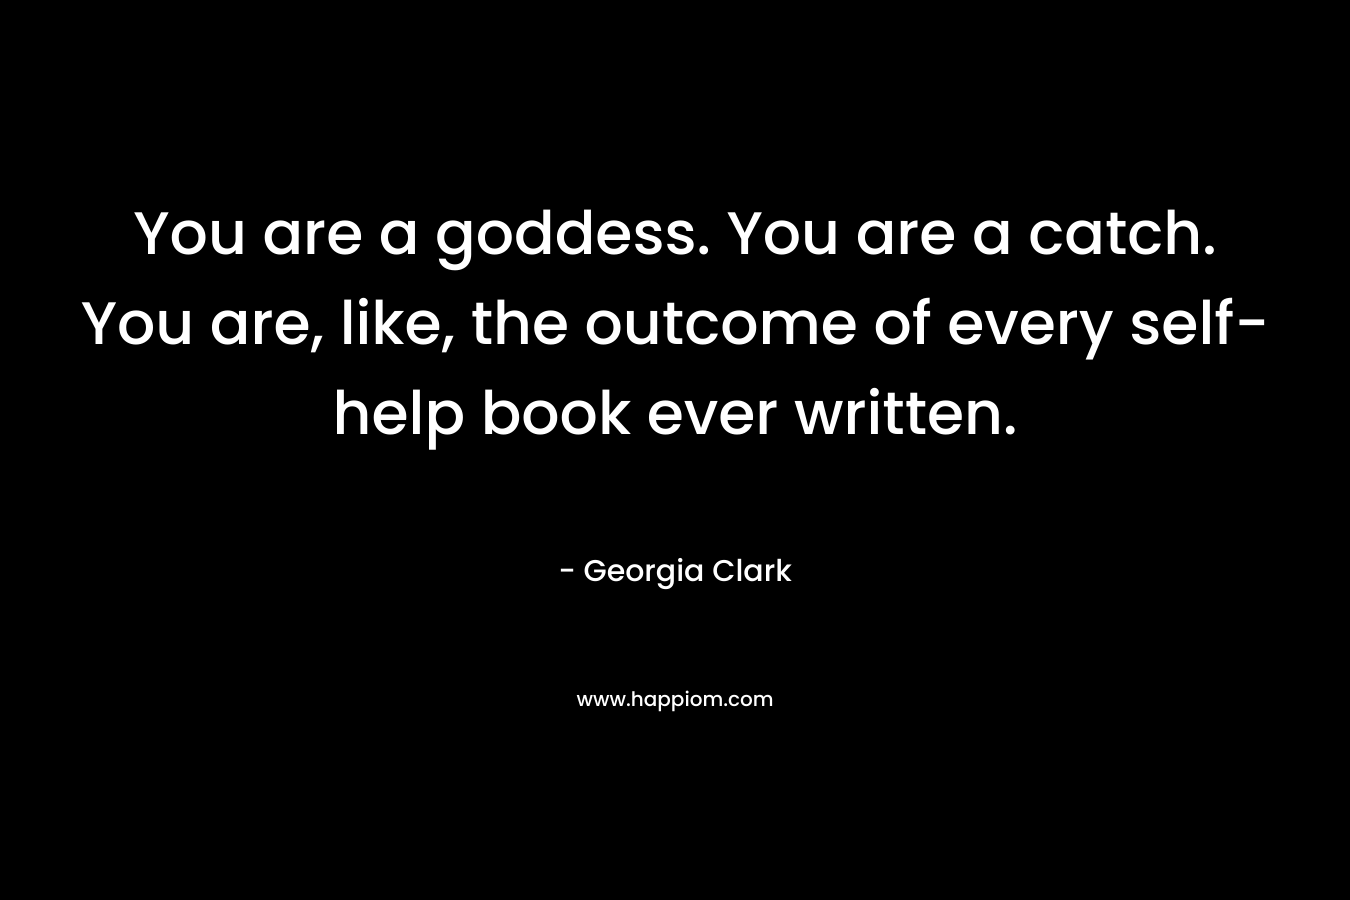 You are a goddess. You are a catch. You are, like, the outcome of every self-help book ever written. – Georgia Clark